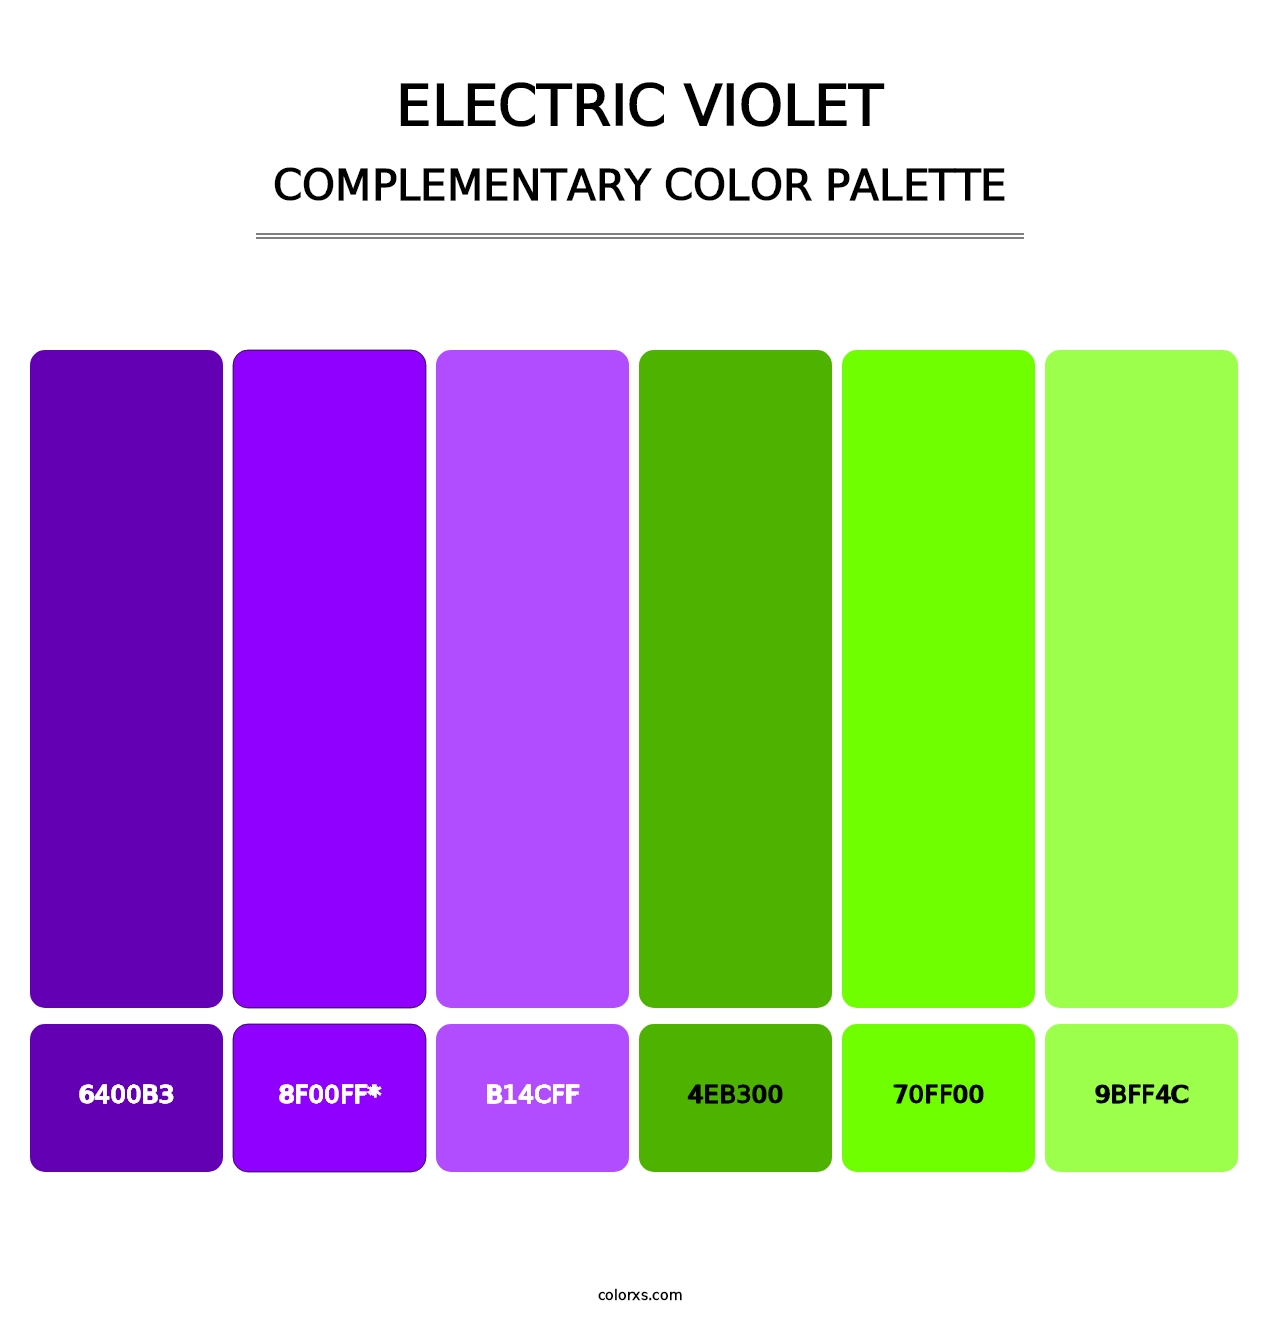 Electric Violet - Complementary Color Palette